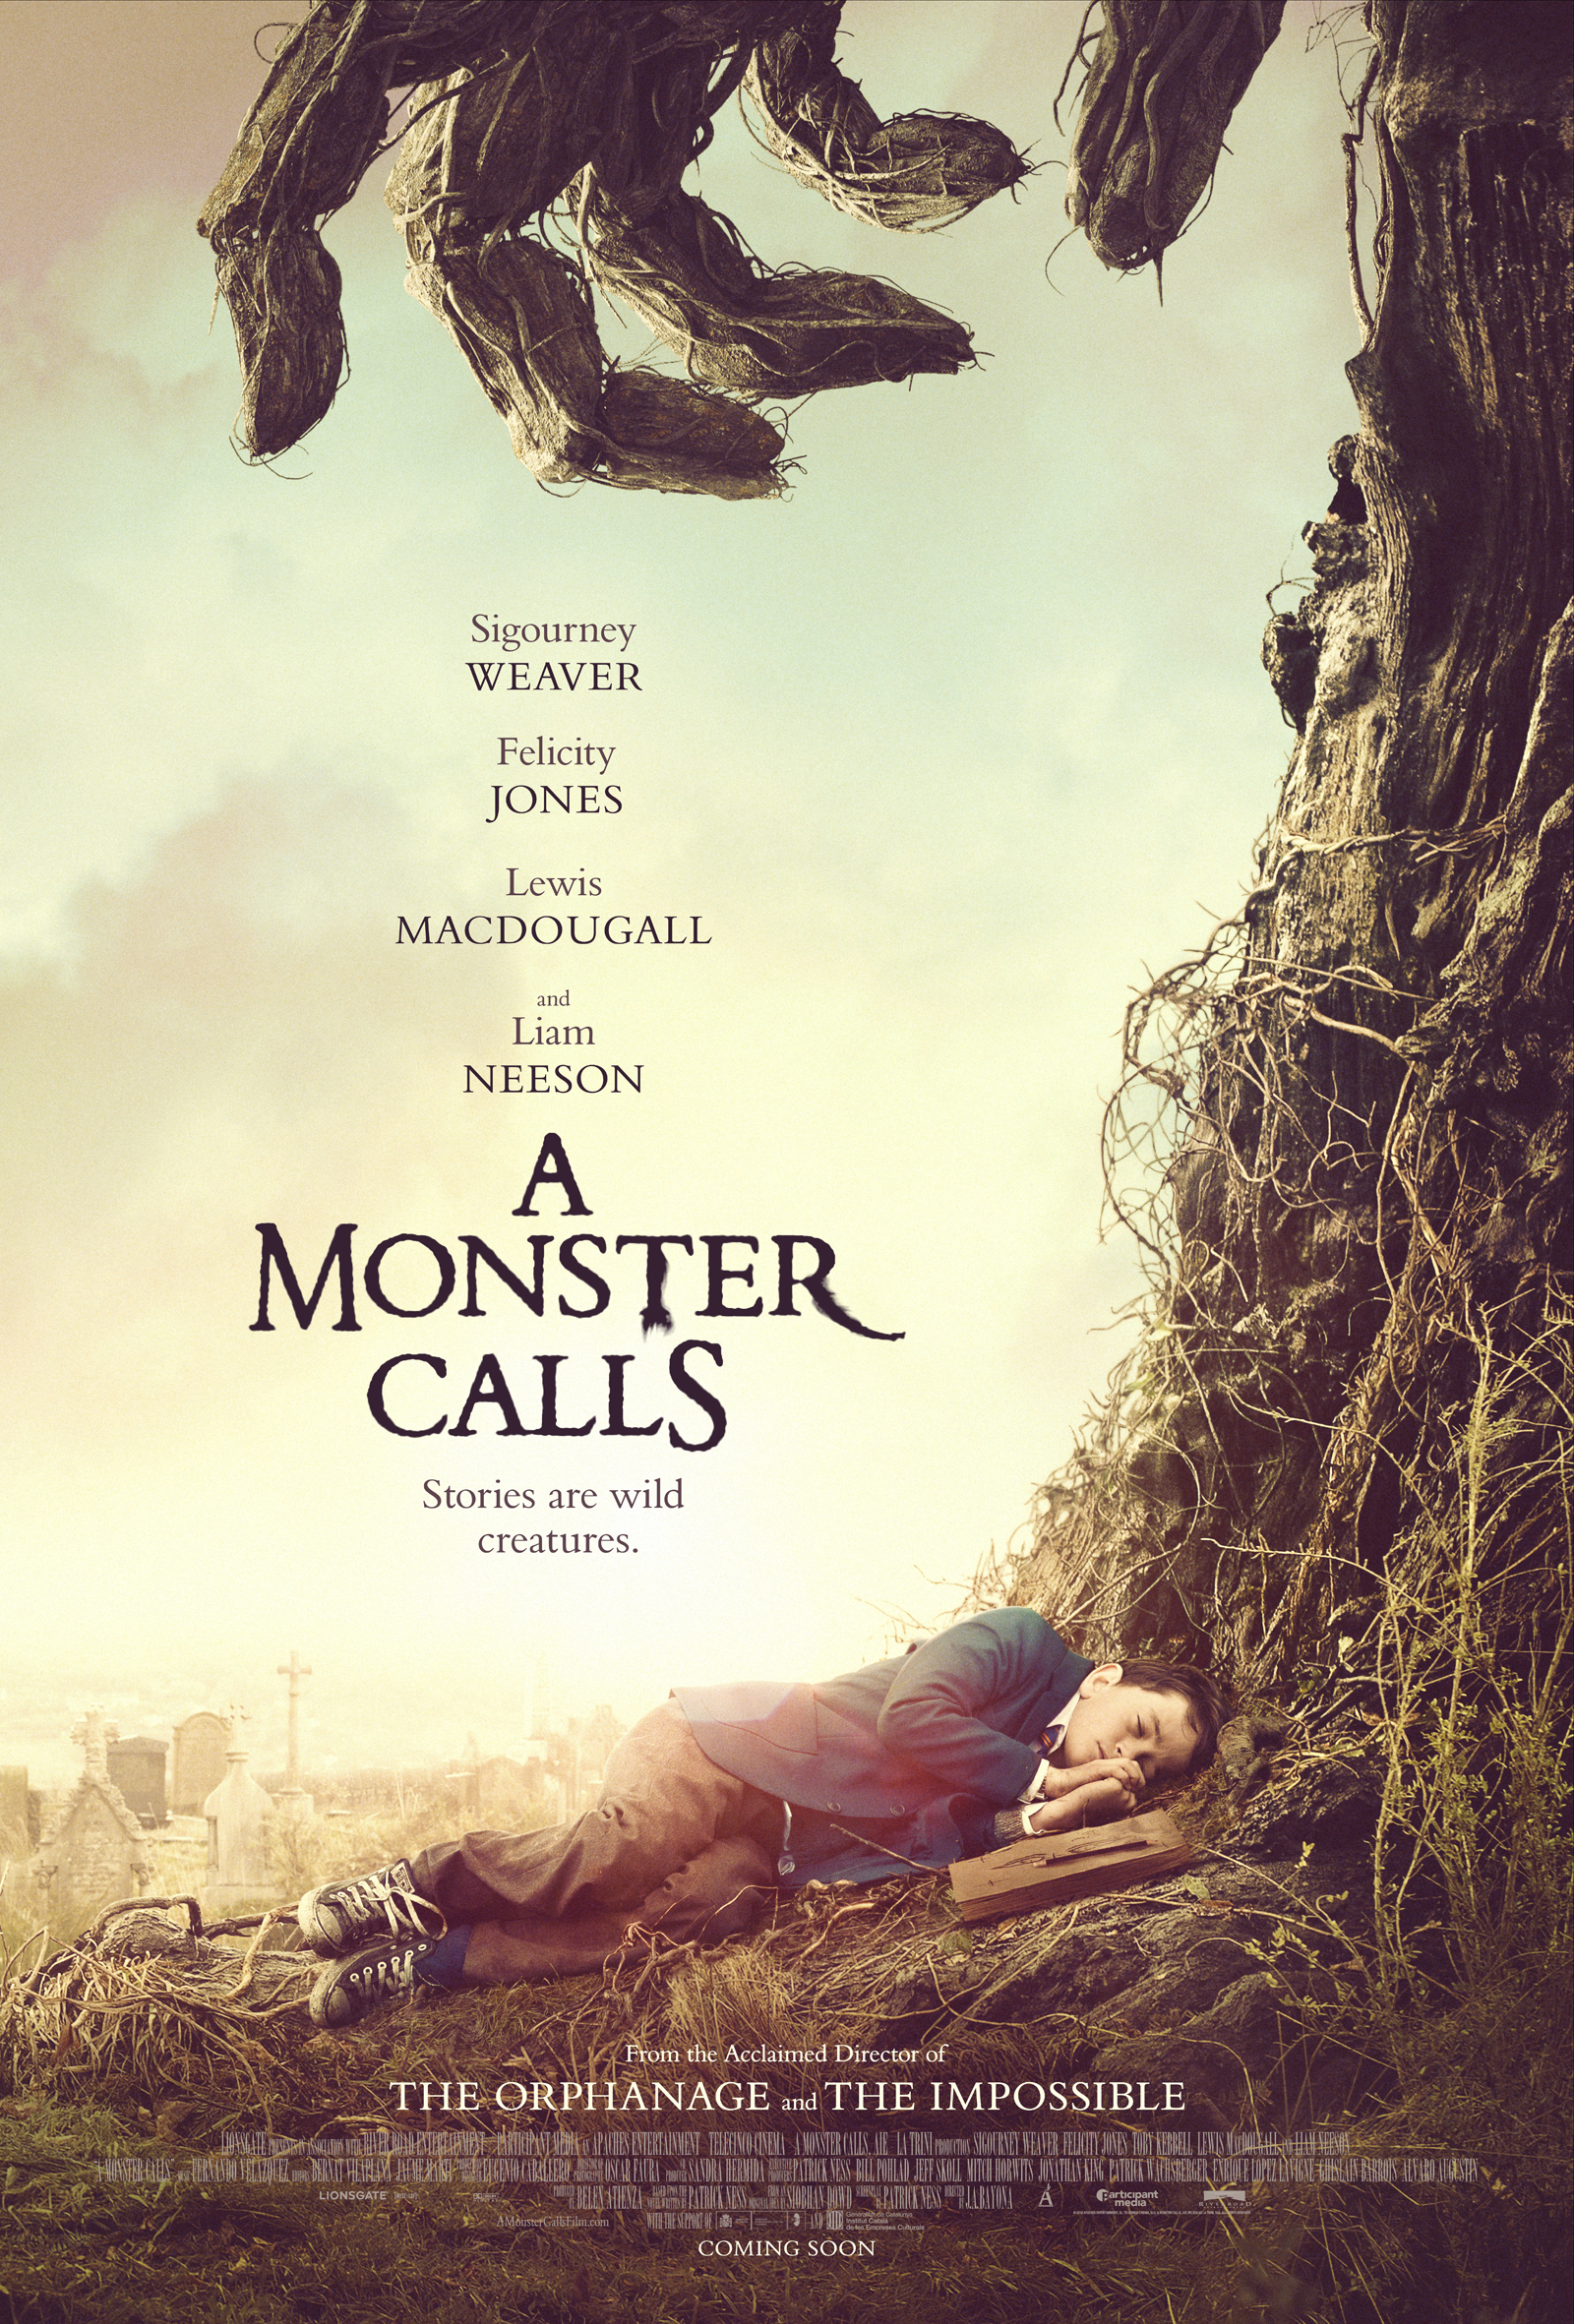 Liam Neeson voices monster in adaptation of children’s bestseller “A Monster Calls”